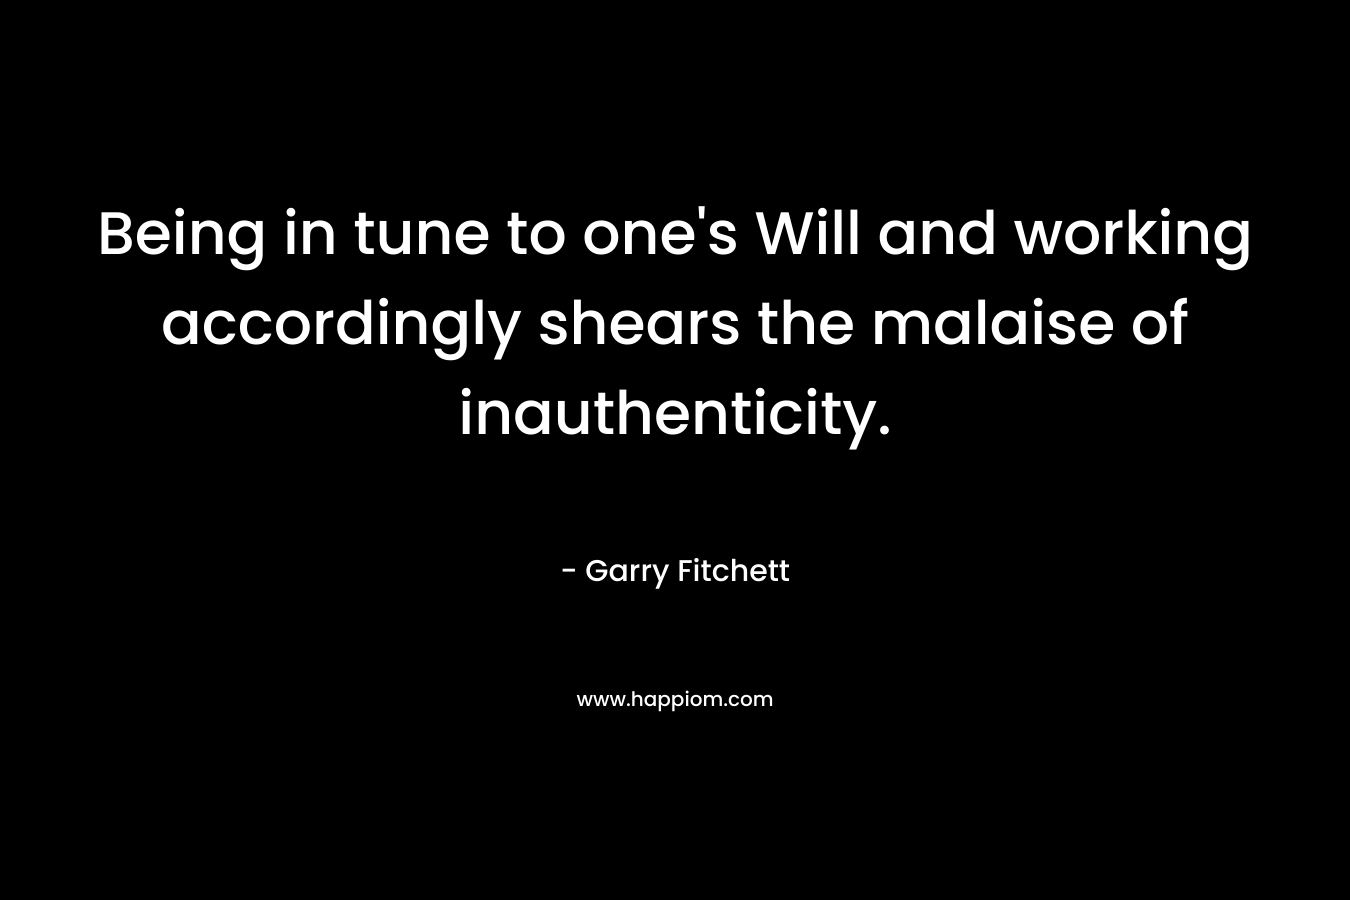 Being in tune to one’s Will and working accordingly shears the malaise of inauthenticity. – Garry Fitchett